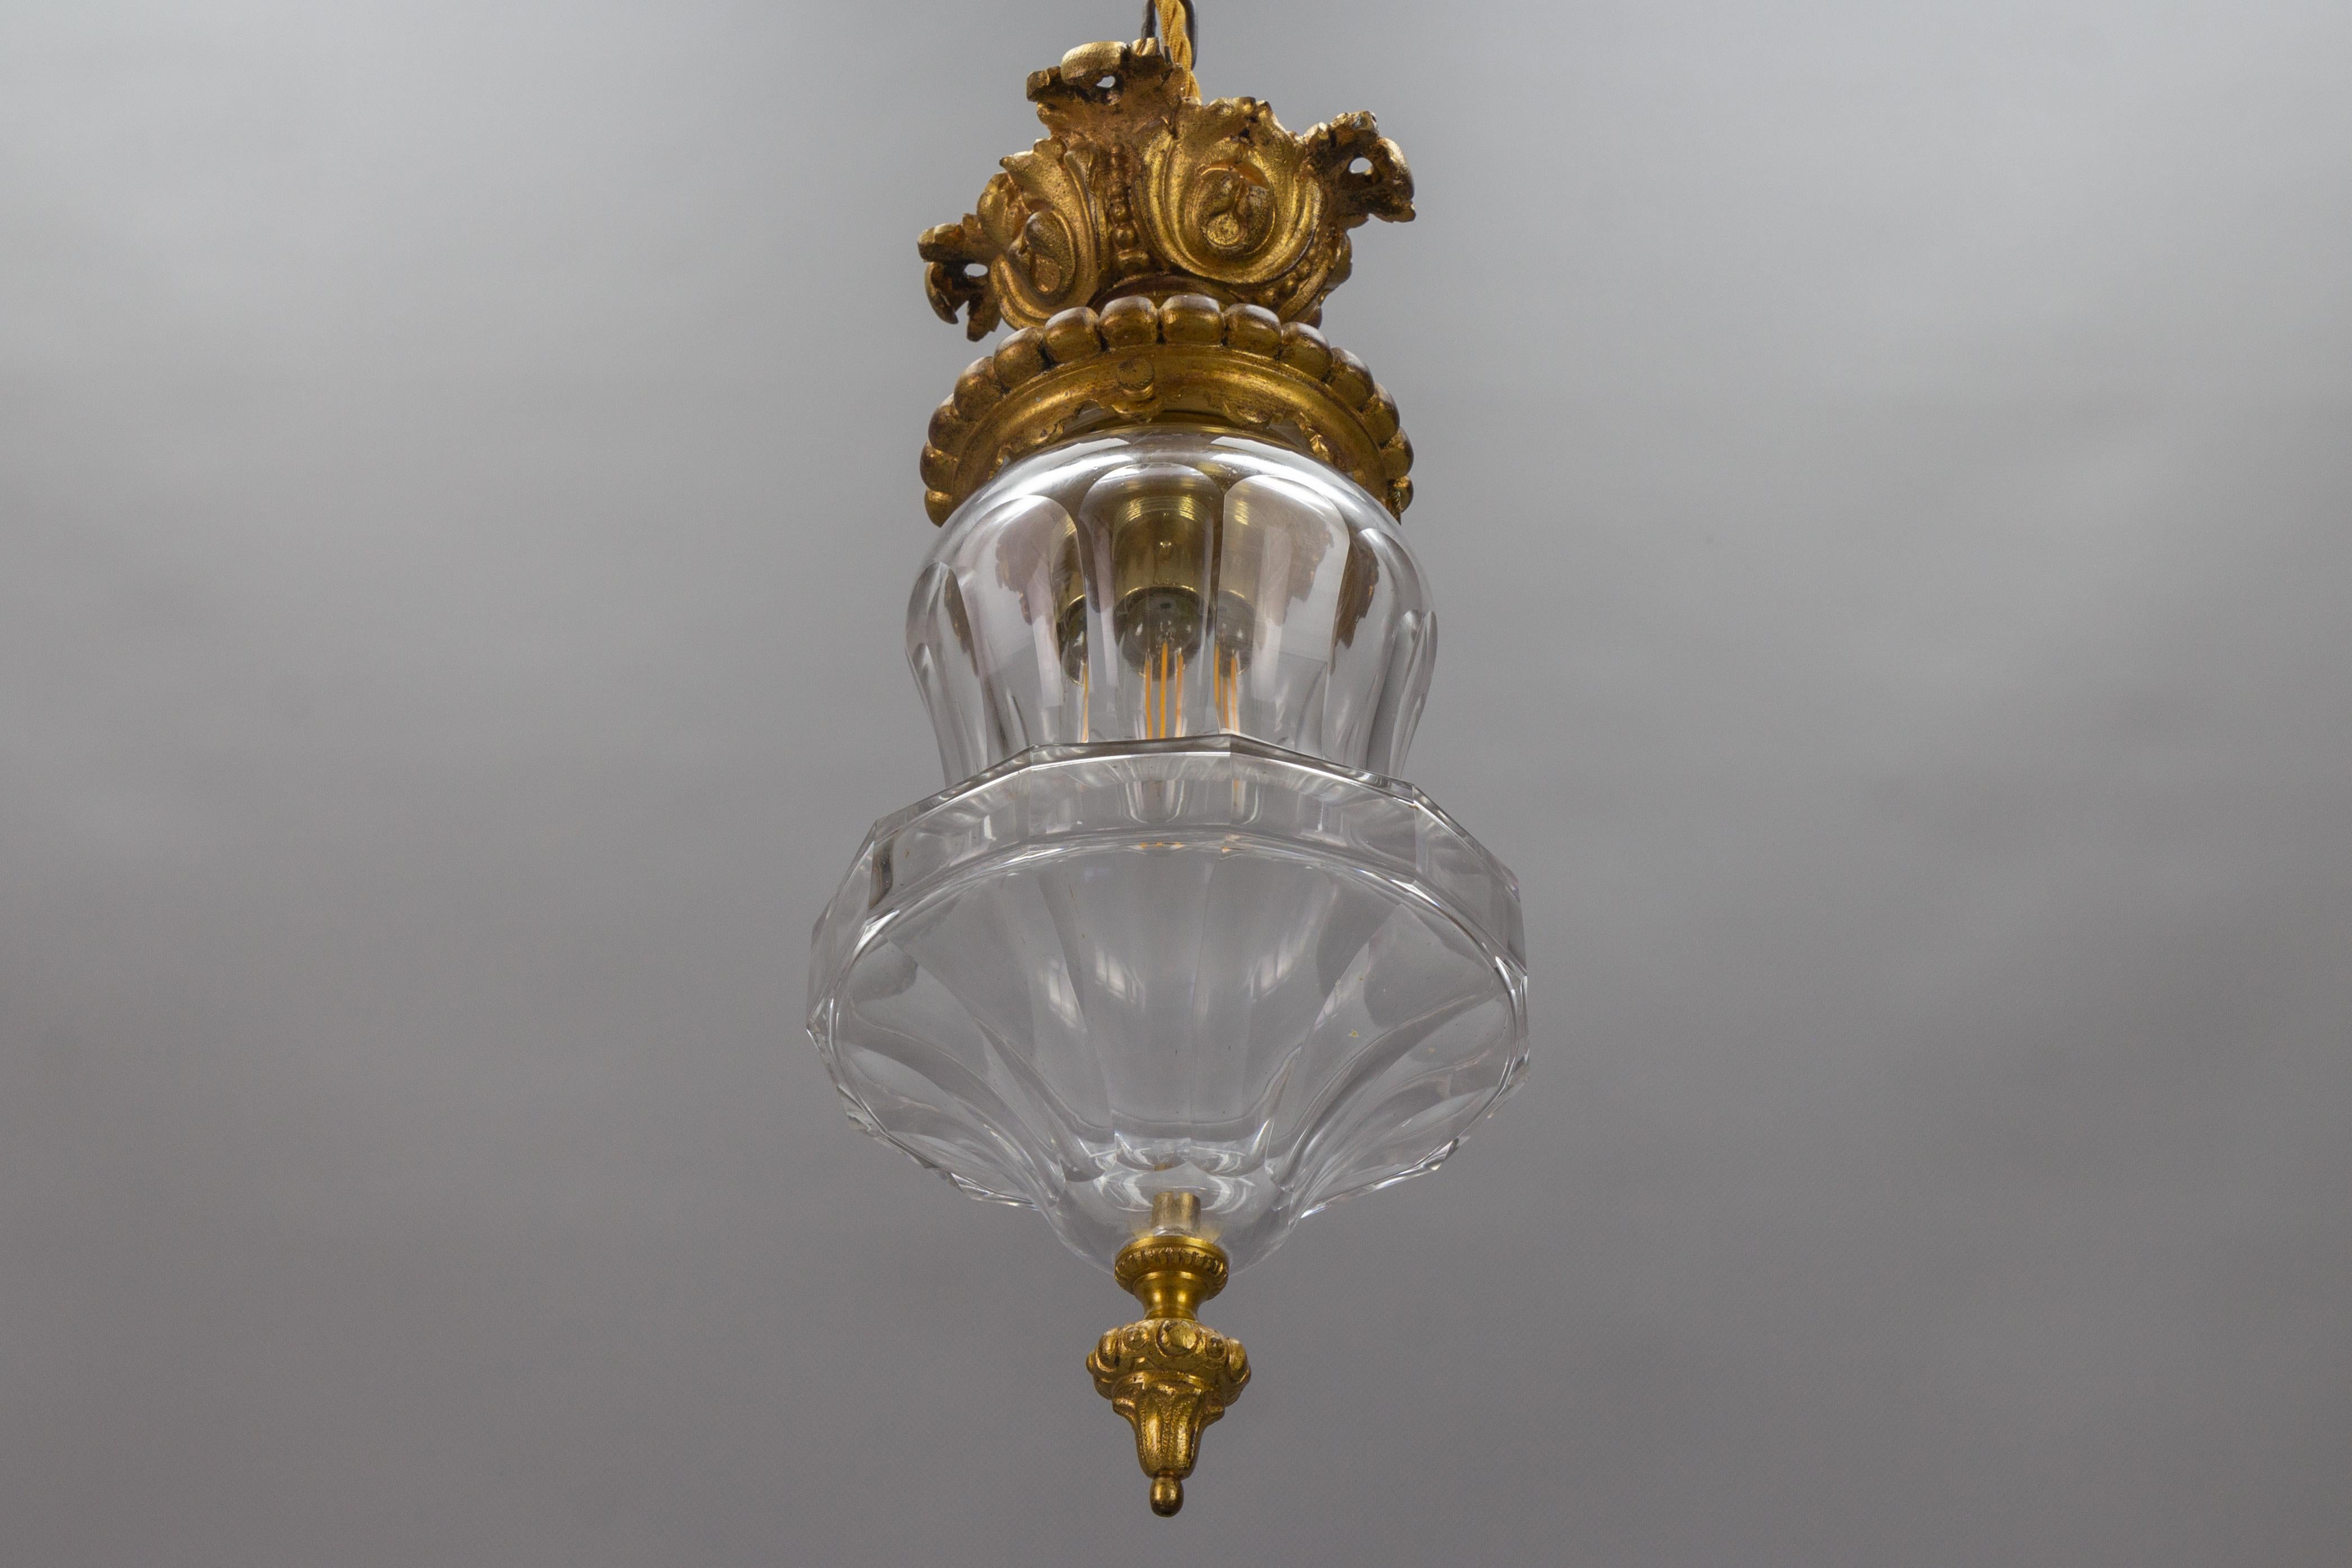 French Rococo style bronze and crystal glass flush mount from circa 1900.
This adorable flush mount or ceiling light features an ornate bronze fixture and a beautifully shaped crystal glass lampshade with a bronze finial.
One new socket for E27